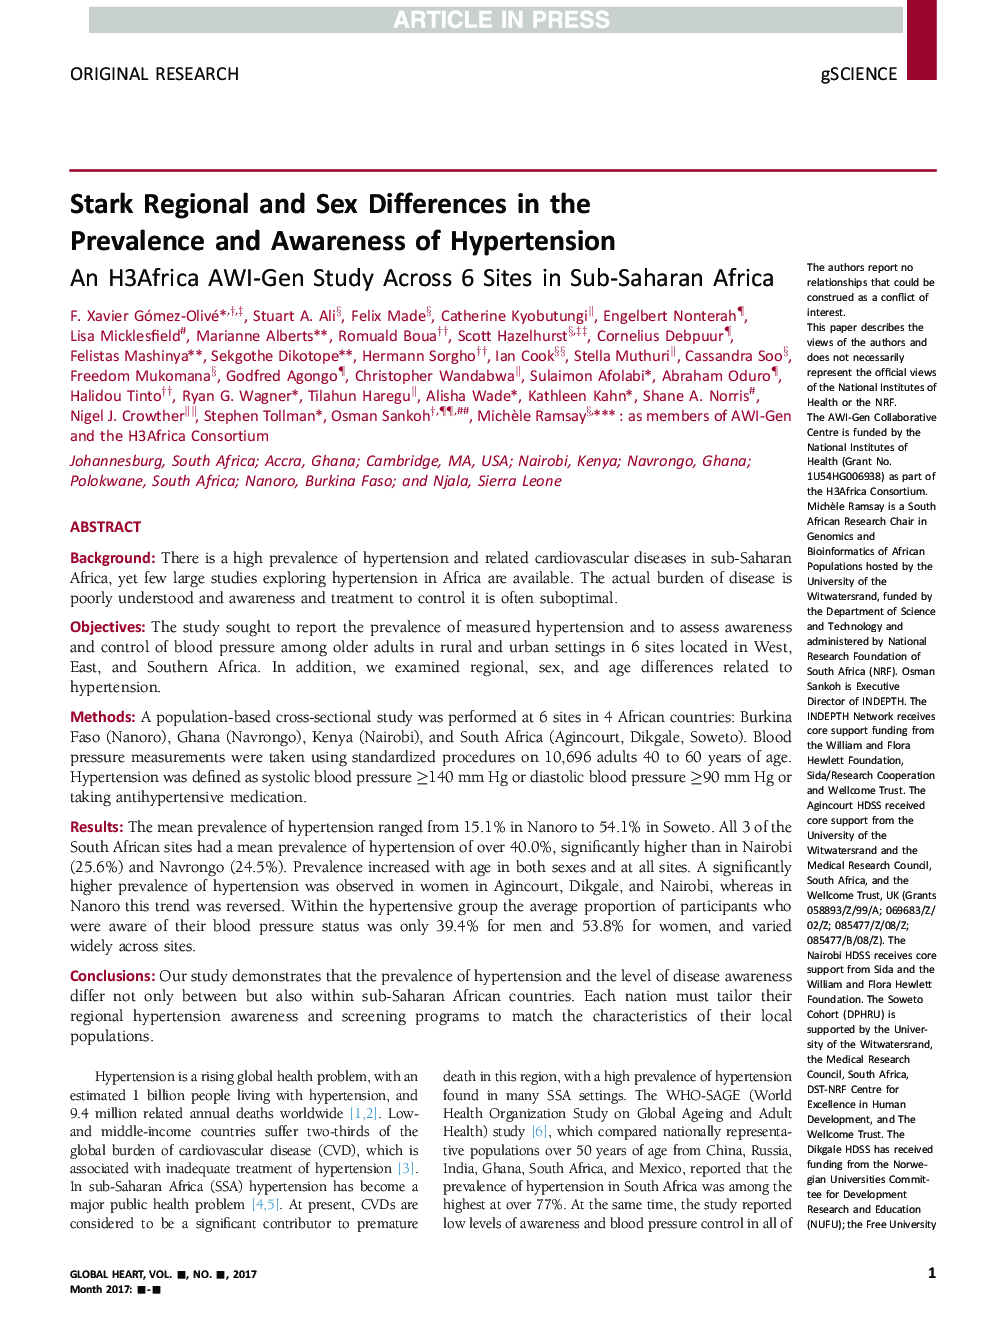 Regional and Sex Differences in the Prevalence and Awareness of Hypertension